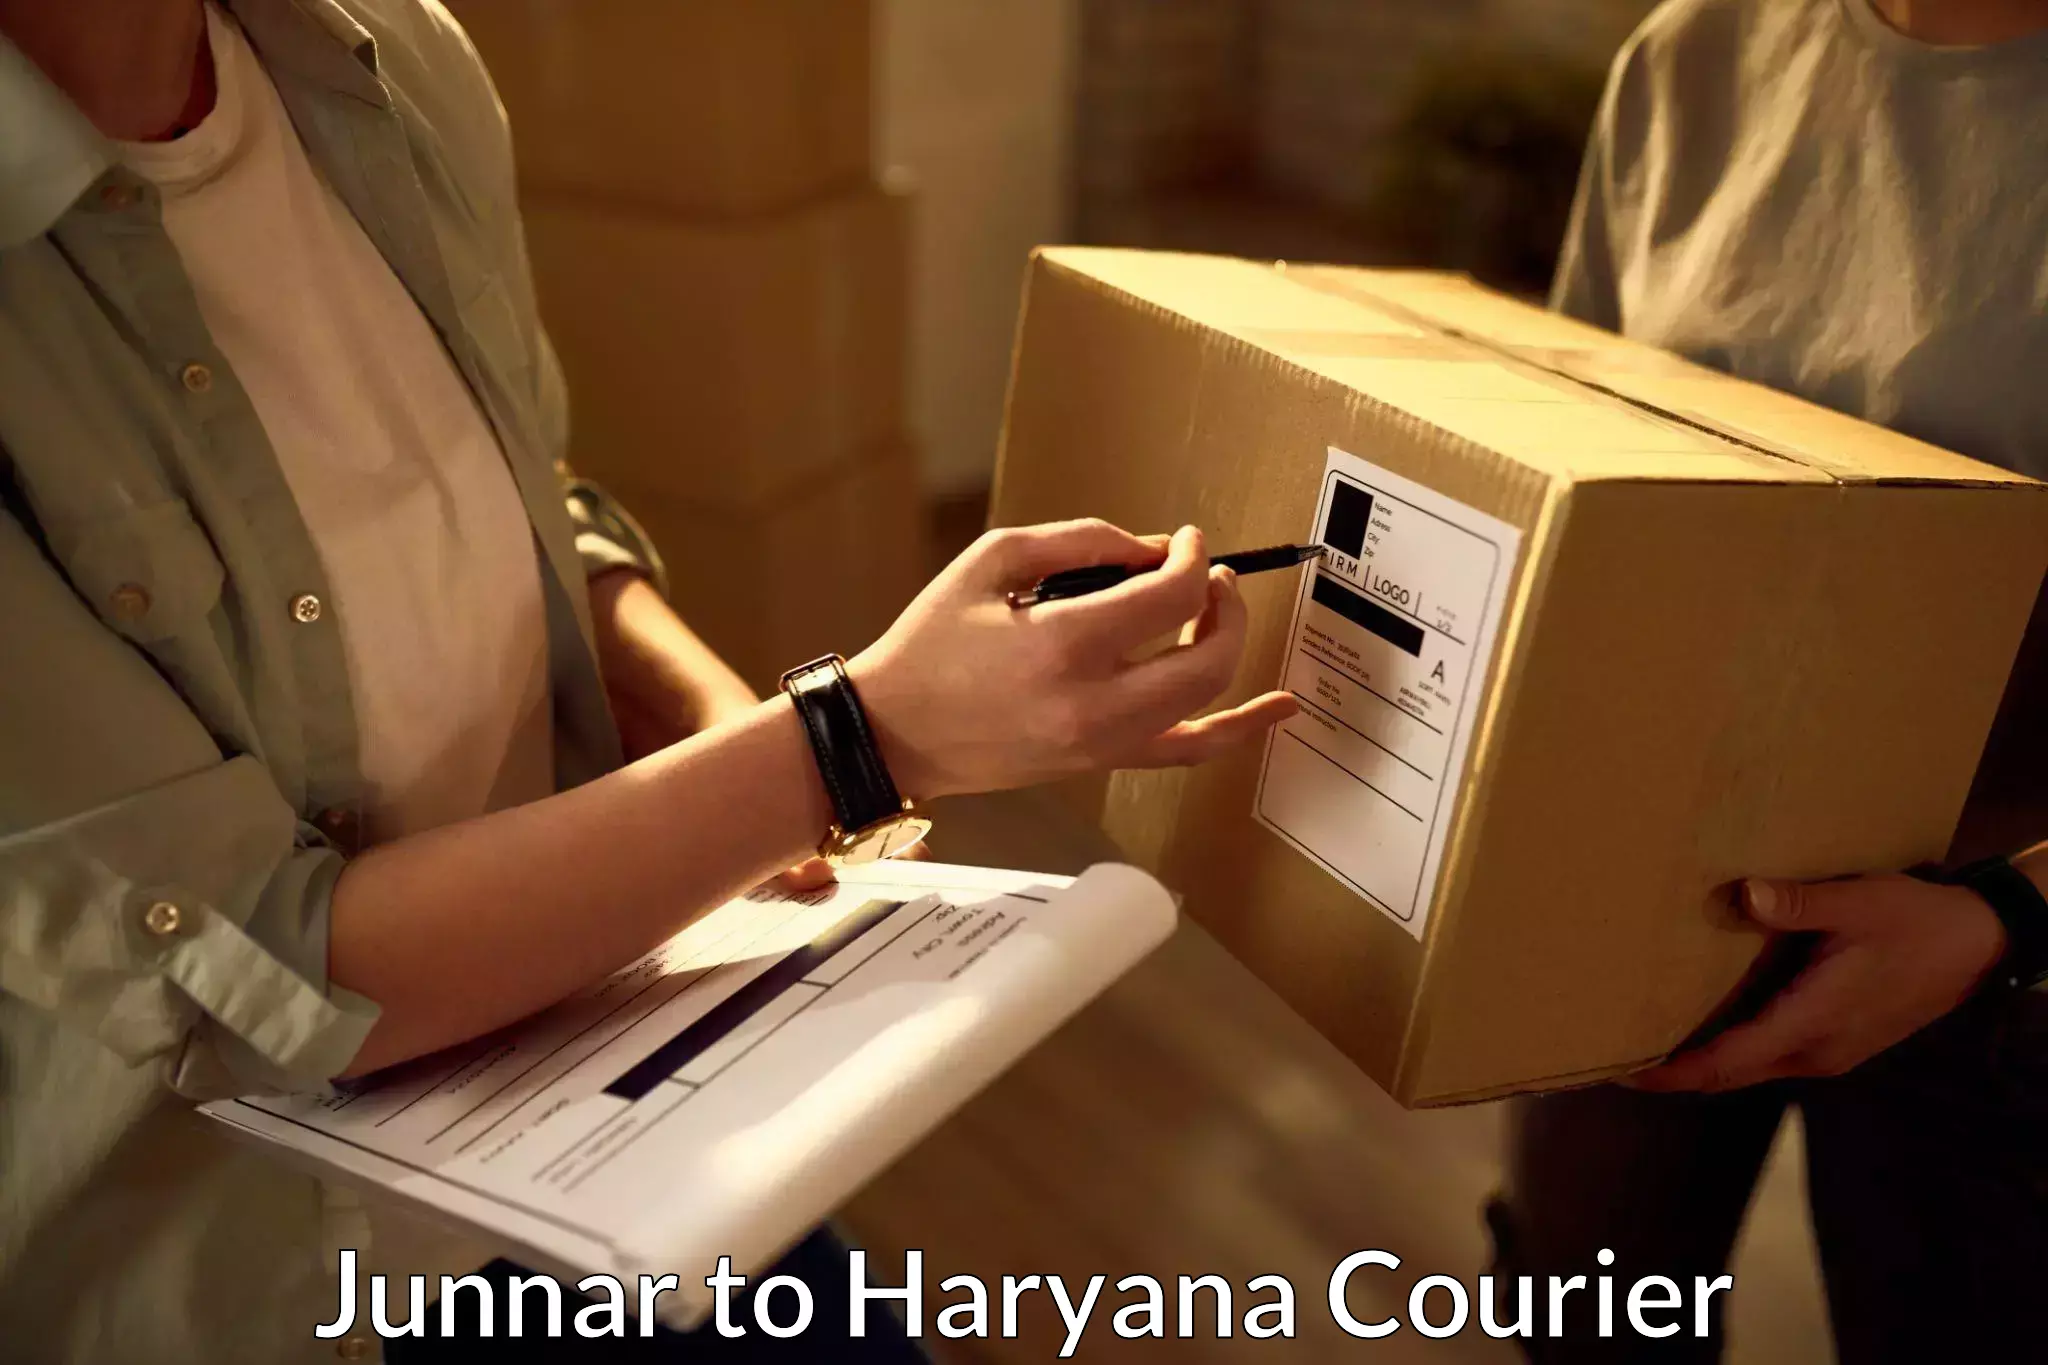 On-call courier service Junnar to Meham